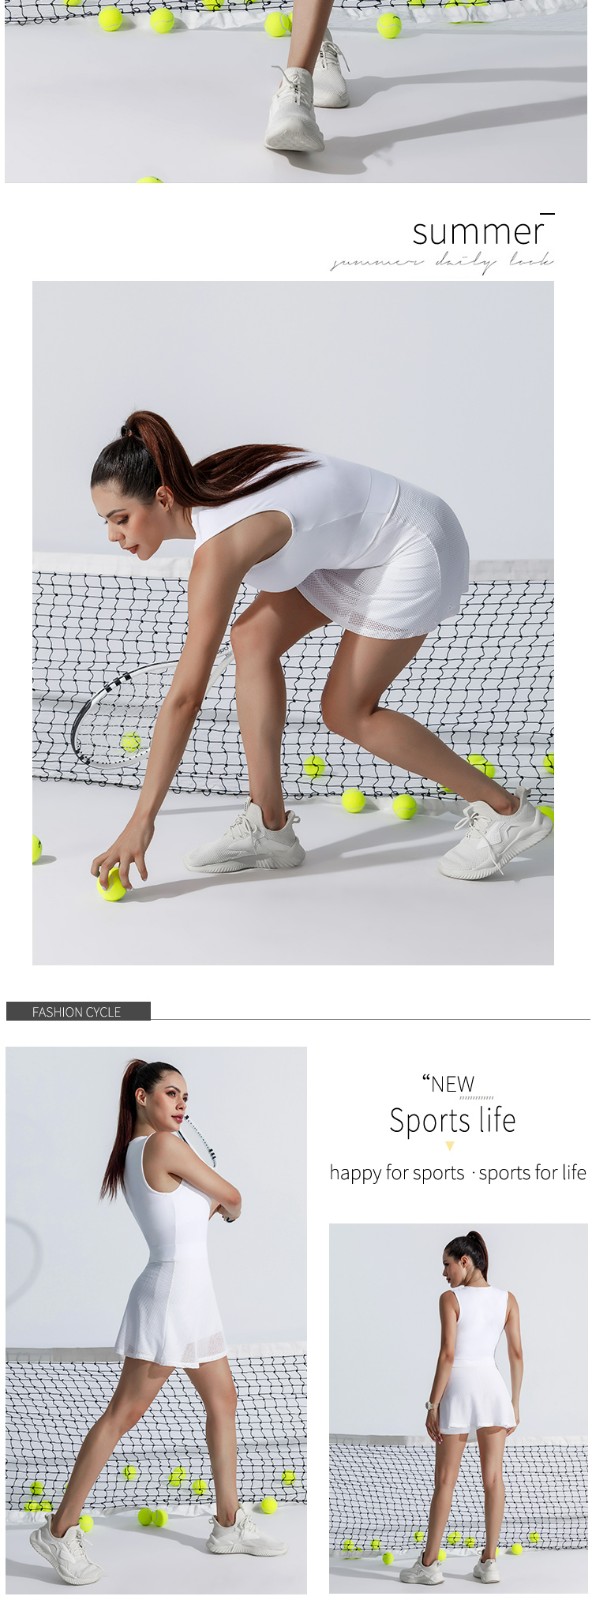 fashion women's tennis outfits type for yoga-5